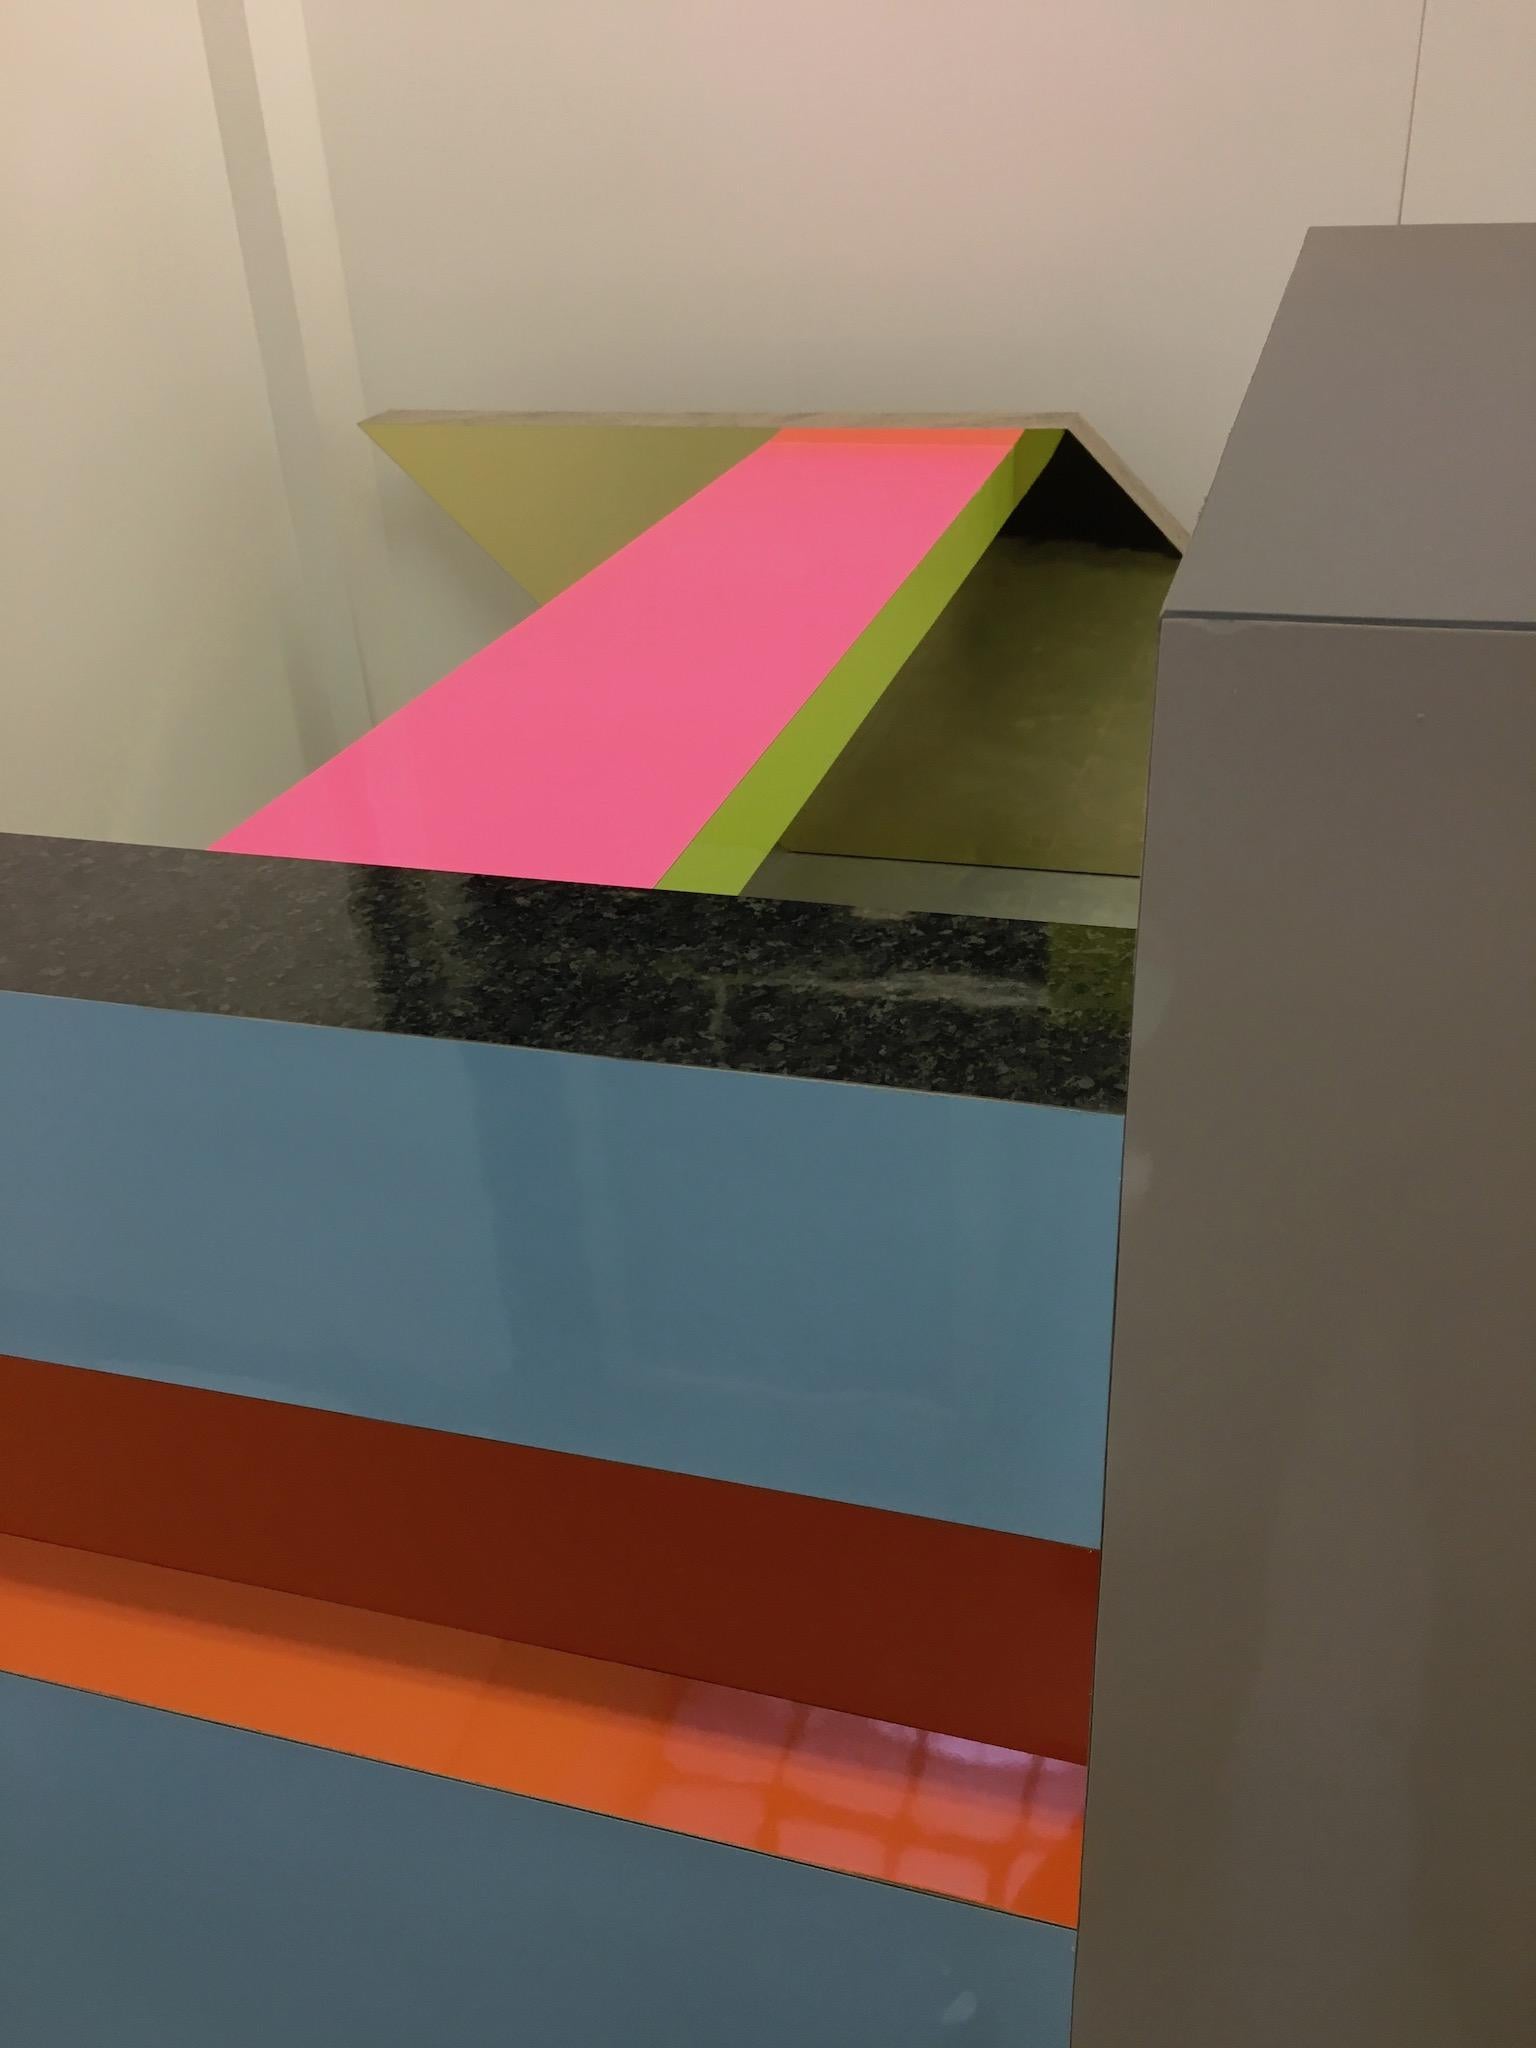 Hot Desk 2, Berlin, by Russell Bamber, 2018, Colored Laminate on Ply Structure For Sale 6